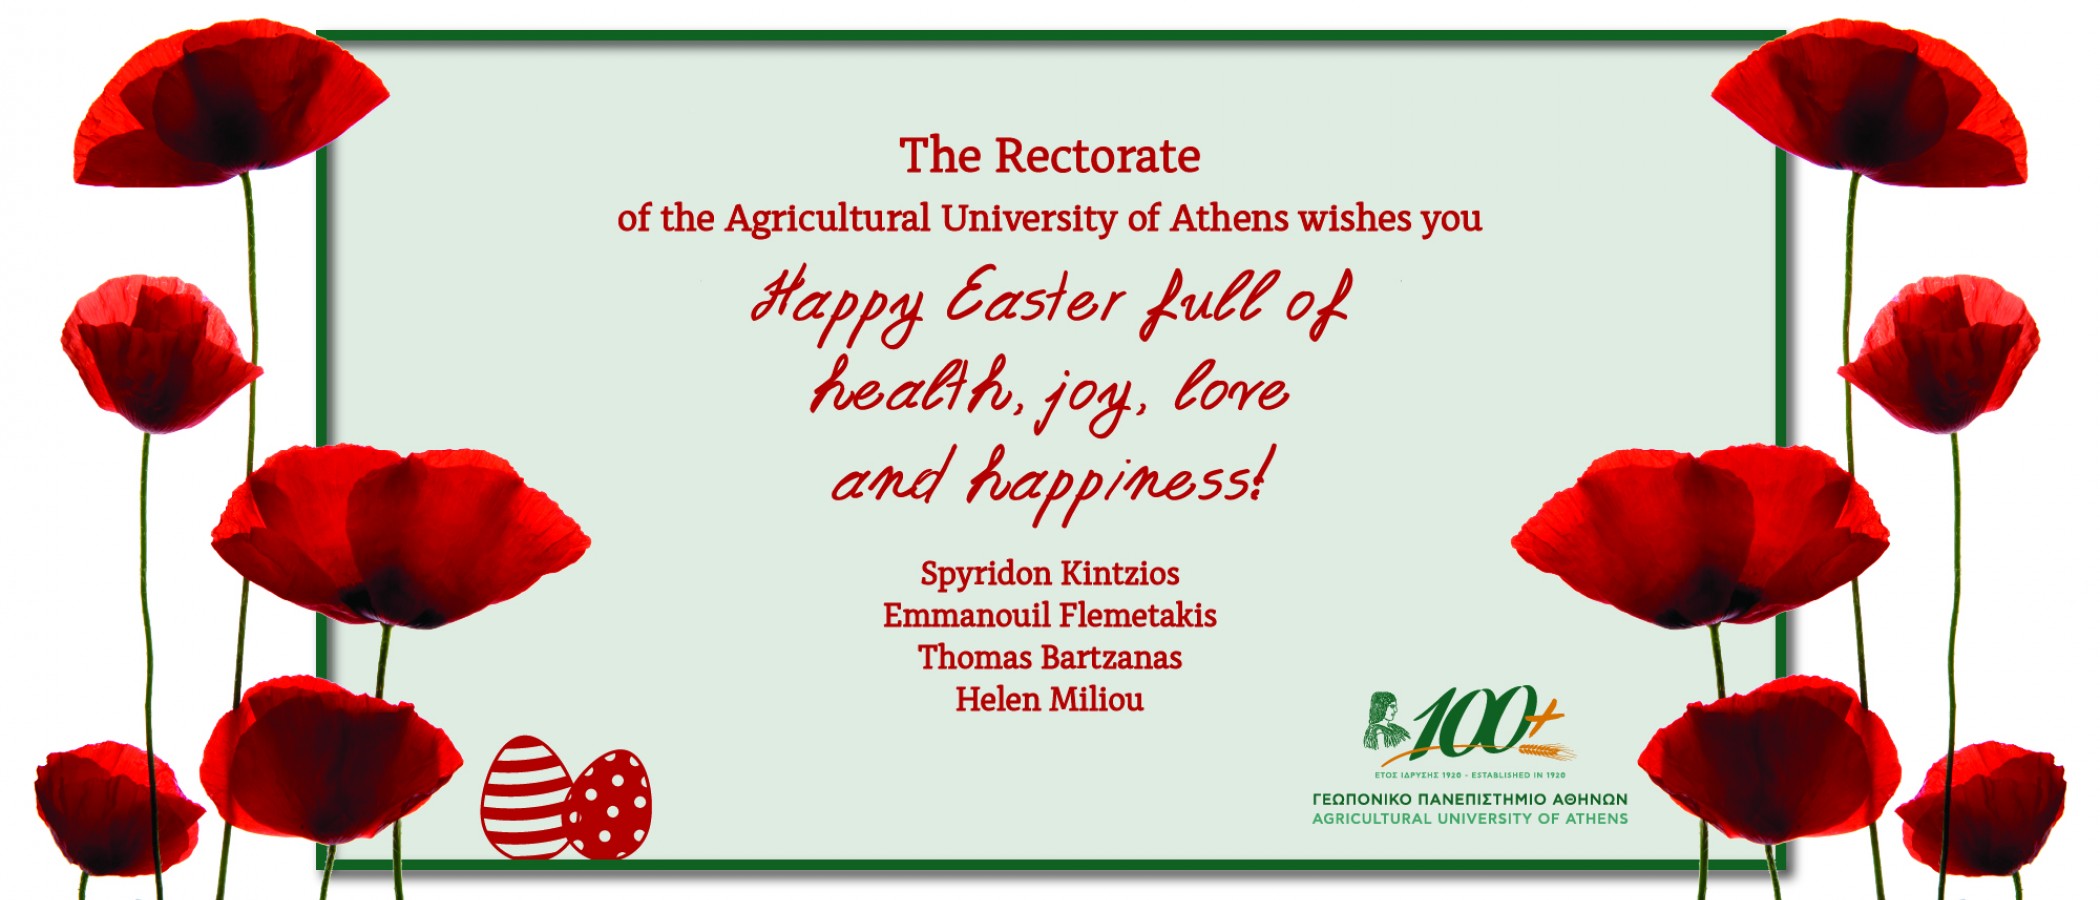 Easter Card of Rectorate Authorities of Agricultural University of Athens